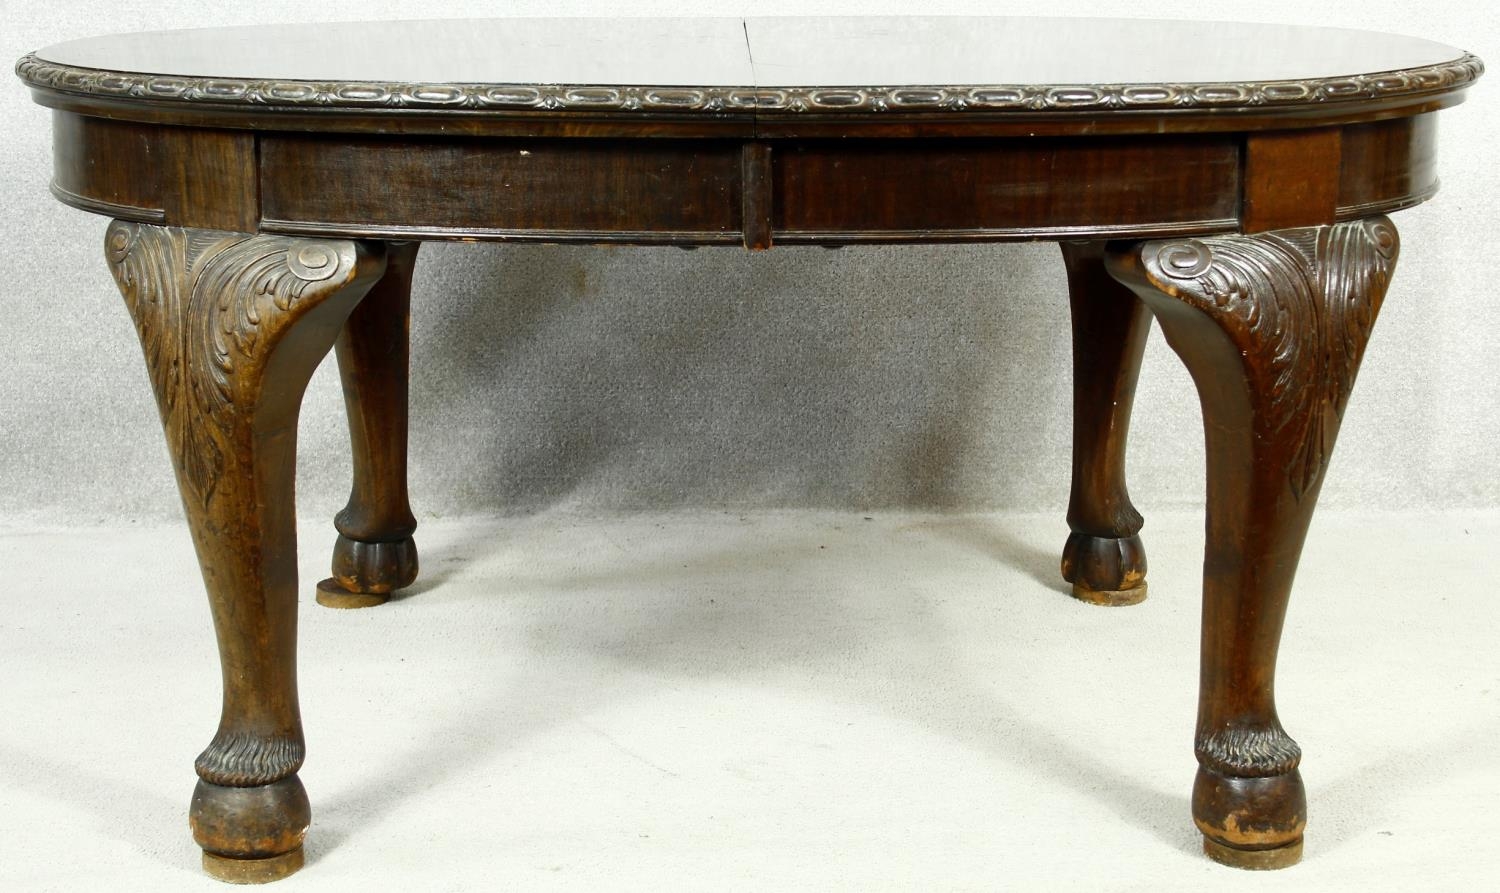 An early 20th century mahogany Georgian style dining table with extra leaf and wind out mechanism on - Image 2 of 7